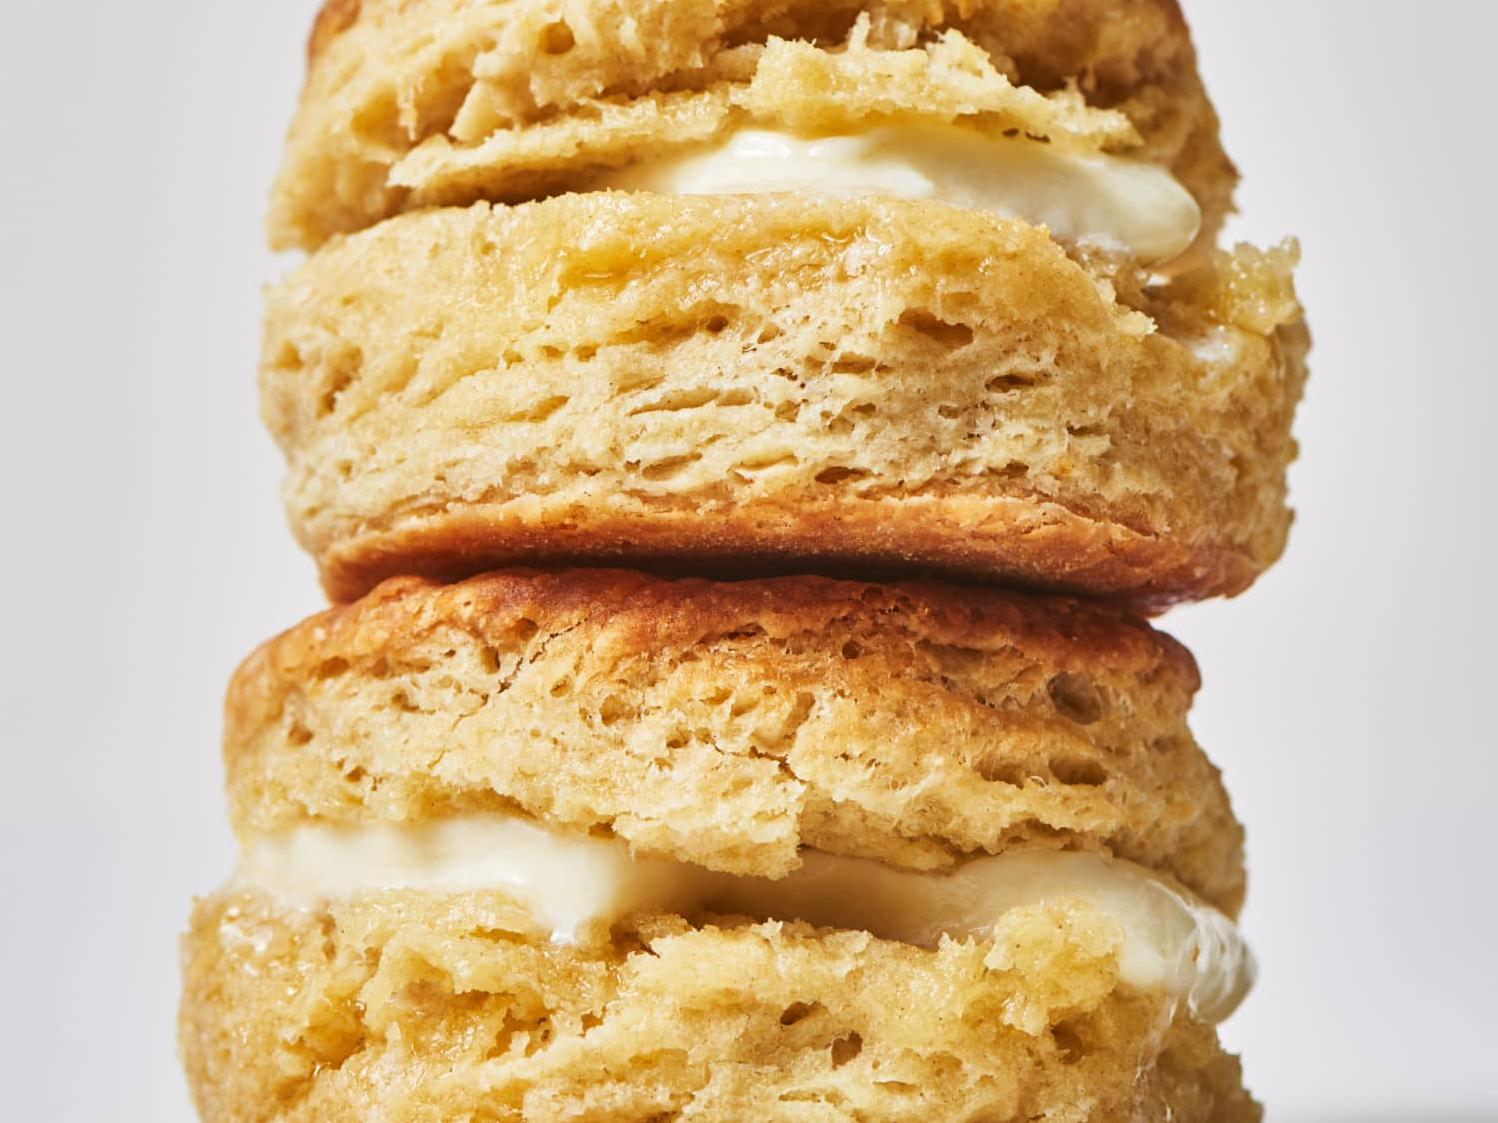  These biscuits are buttery, flaky, and downright irresistible.